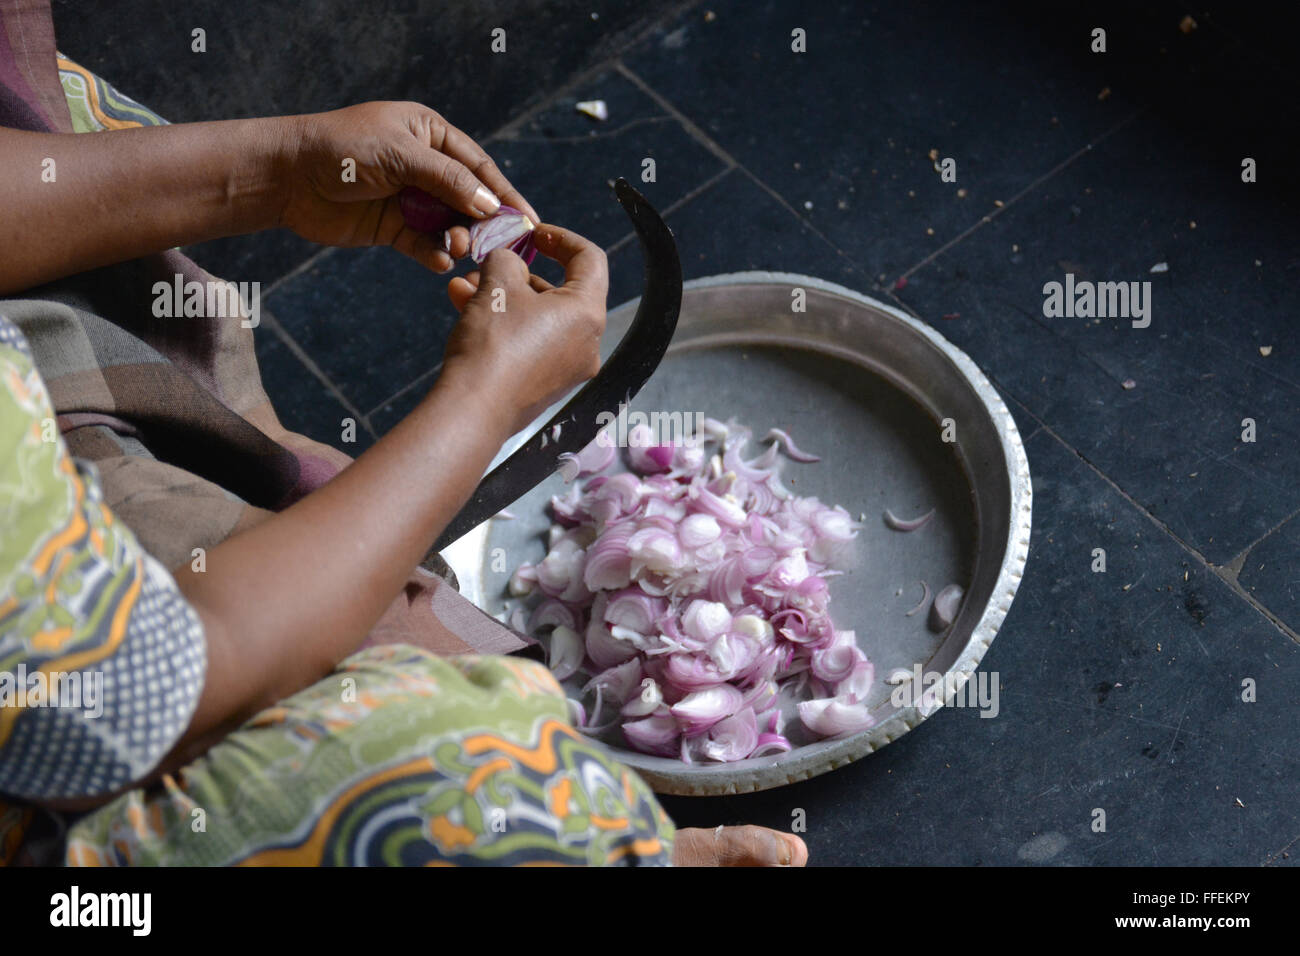 Mumbai, India - October 28, 2015 - Woman cutting chili and onions on a traditional cutting stool  in indian kitchen Stock Photo